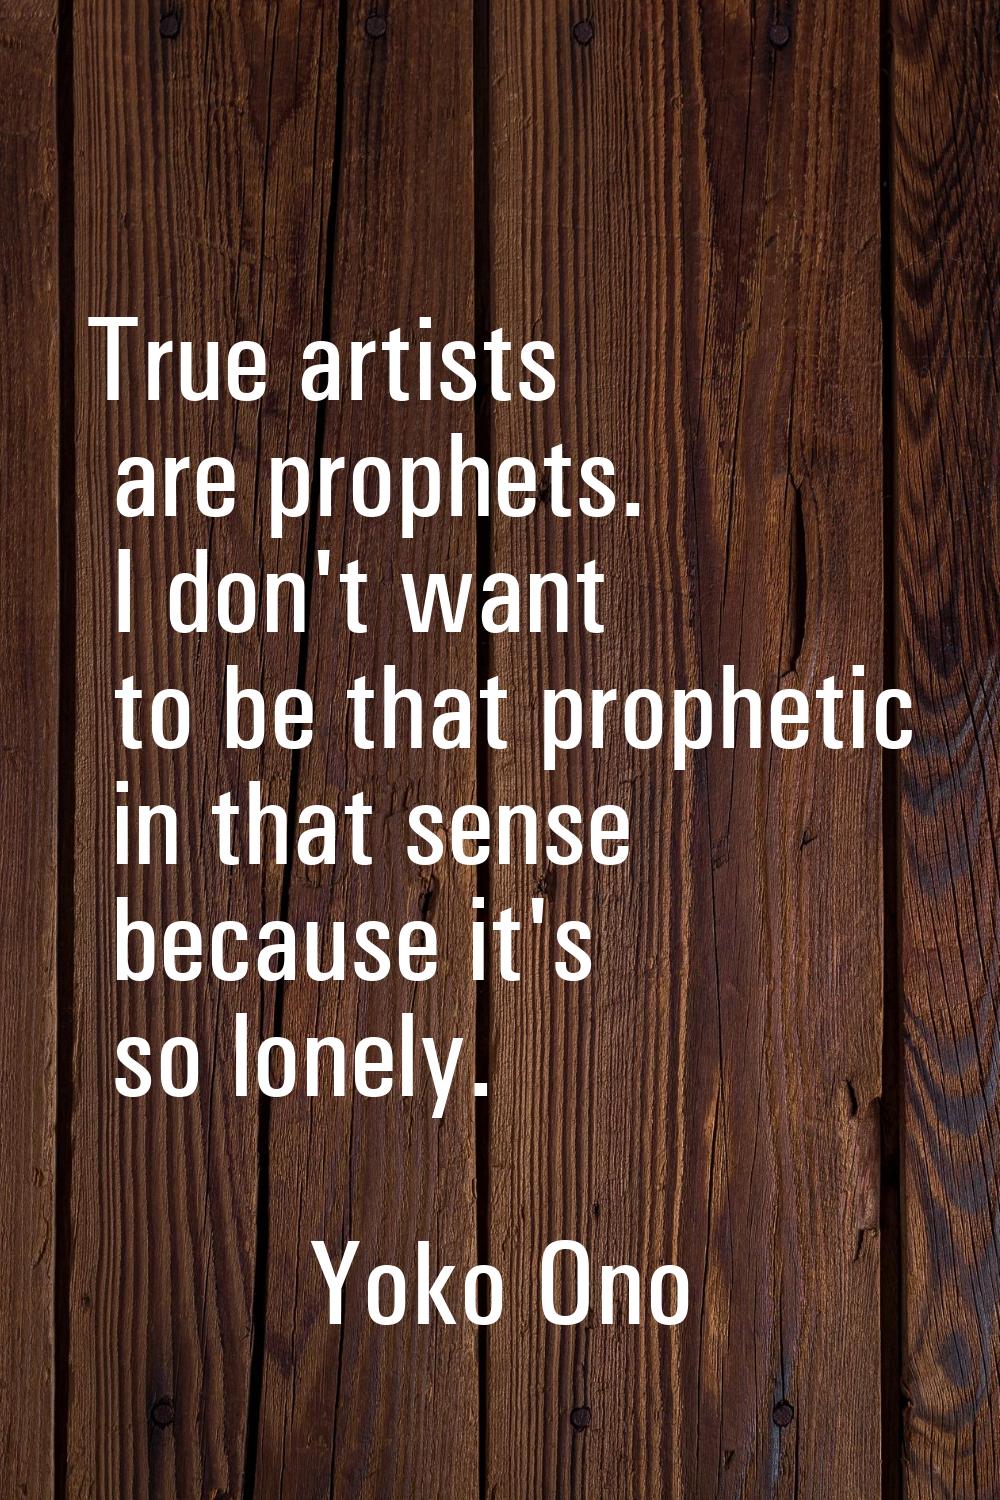 True artists are prophets. I don't want to be that prophetic in that sense because it's so lonely.